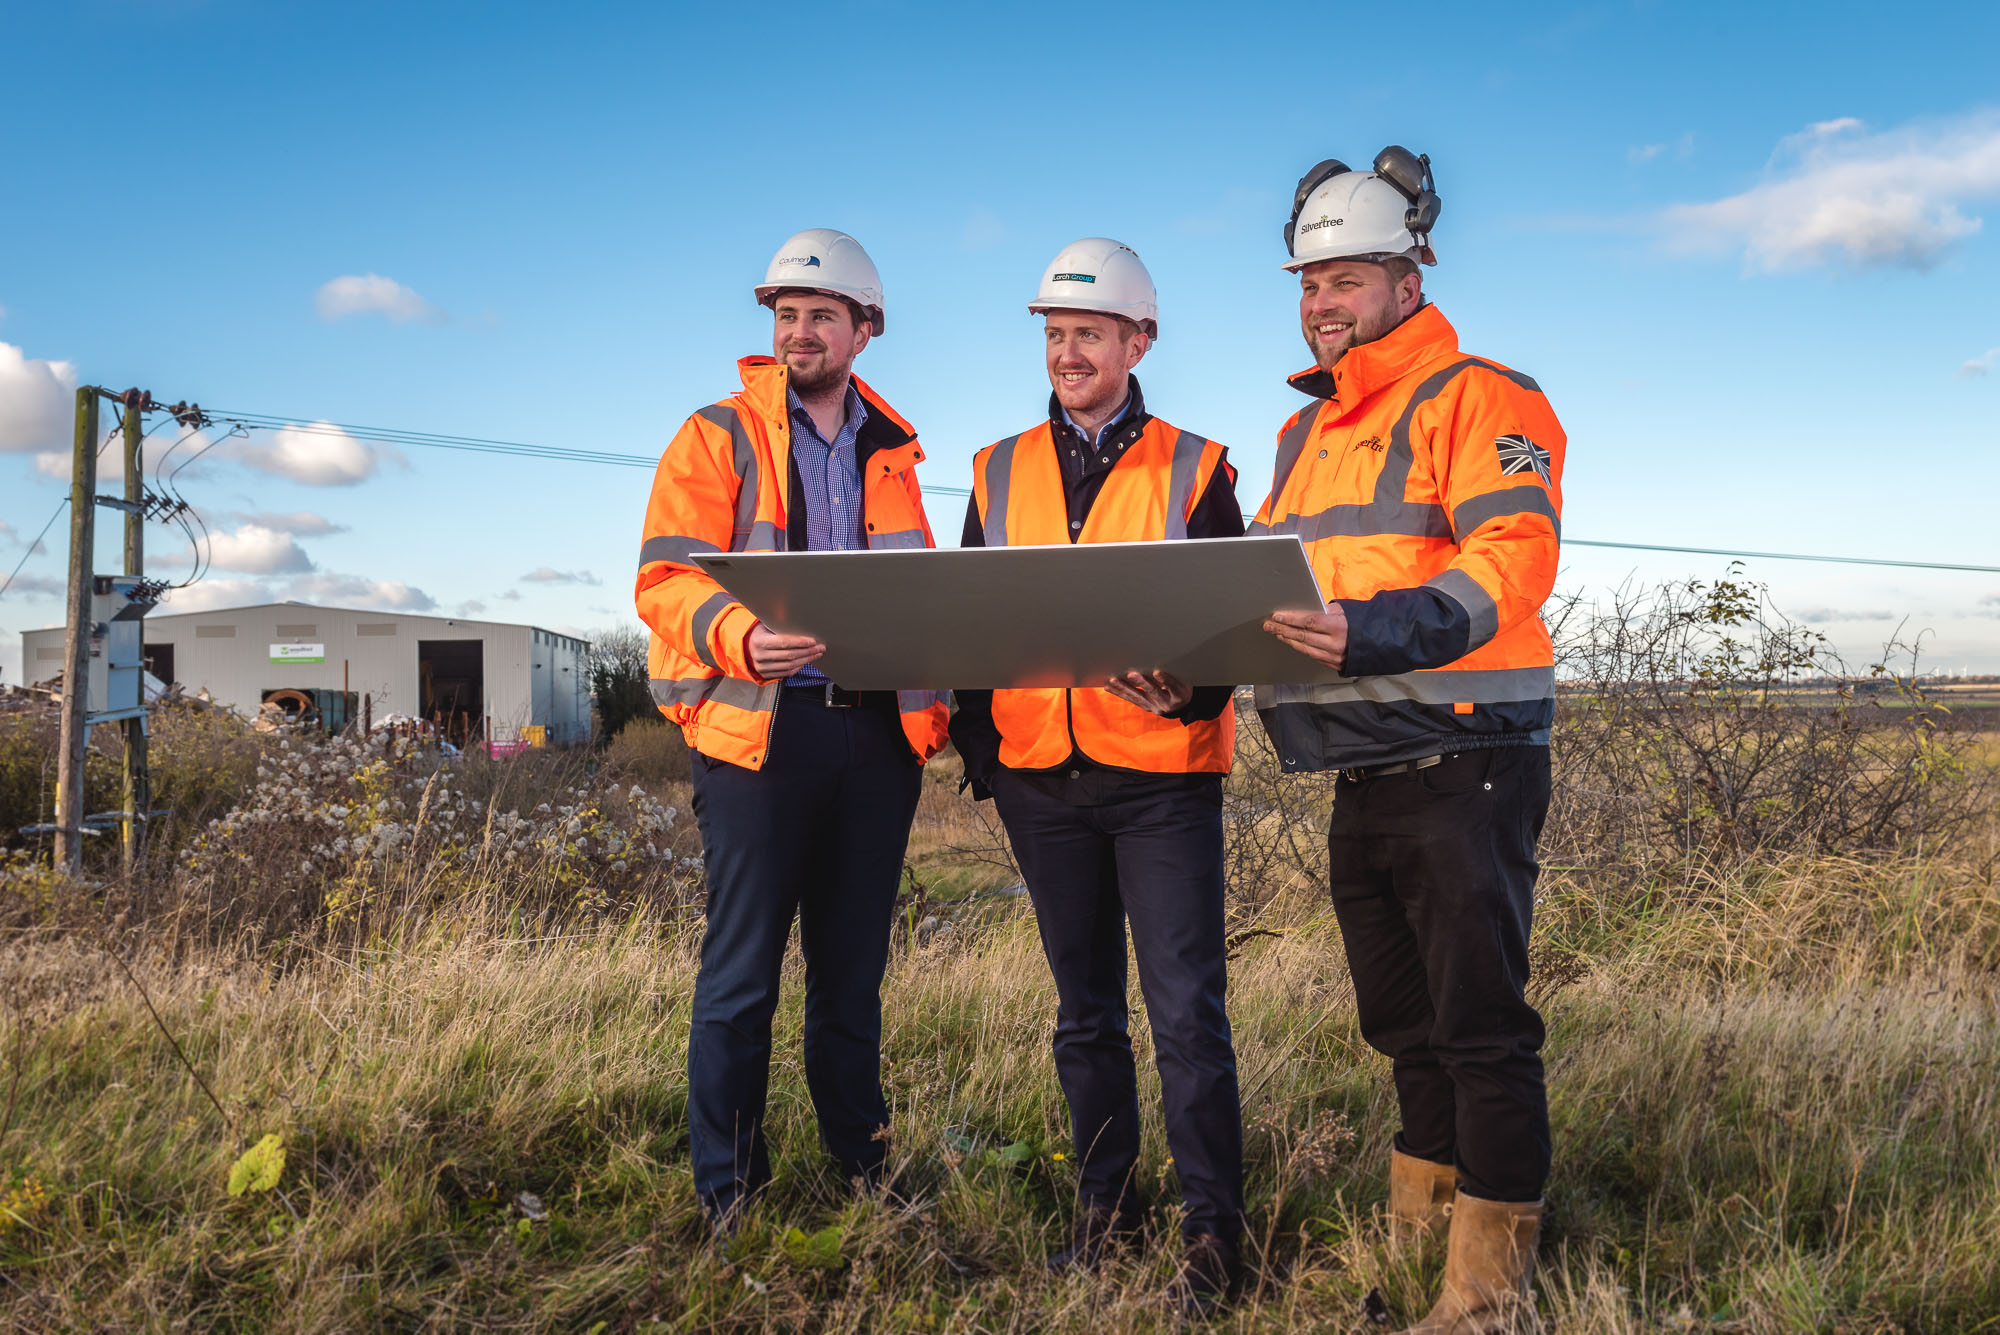 Hard hats and high vis: PR photography Peterborough